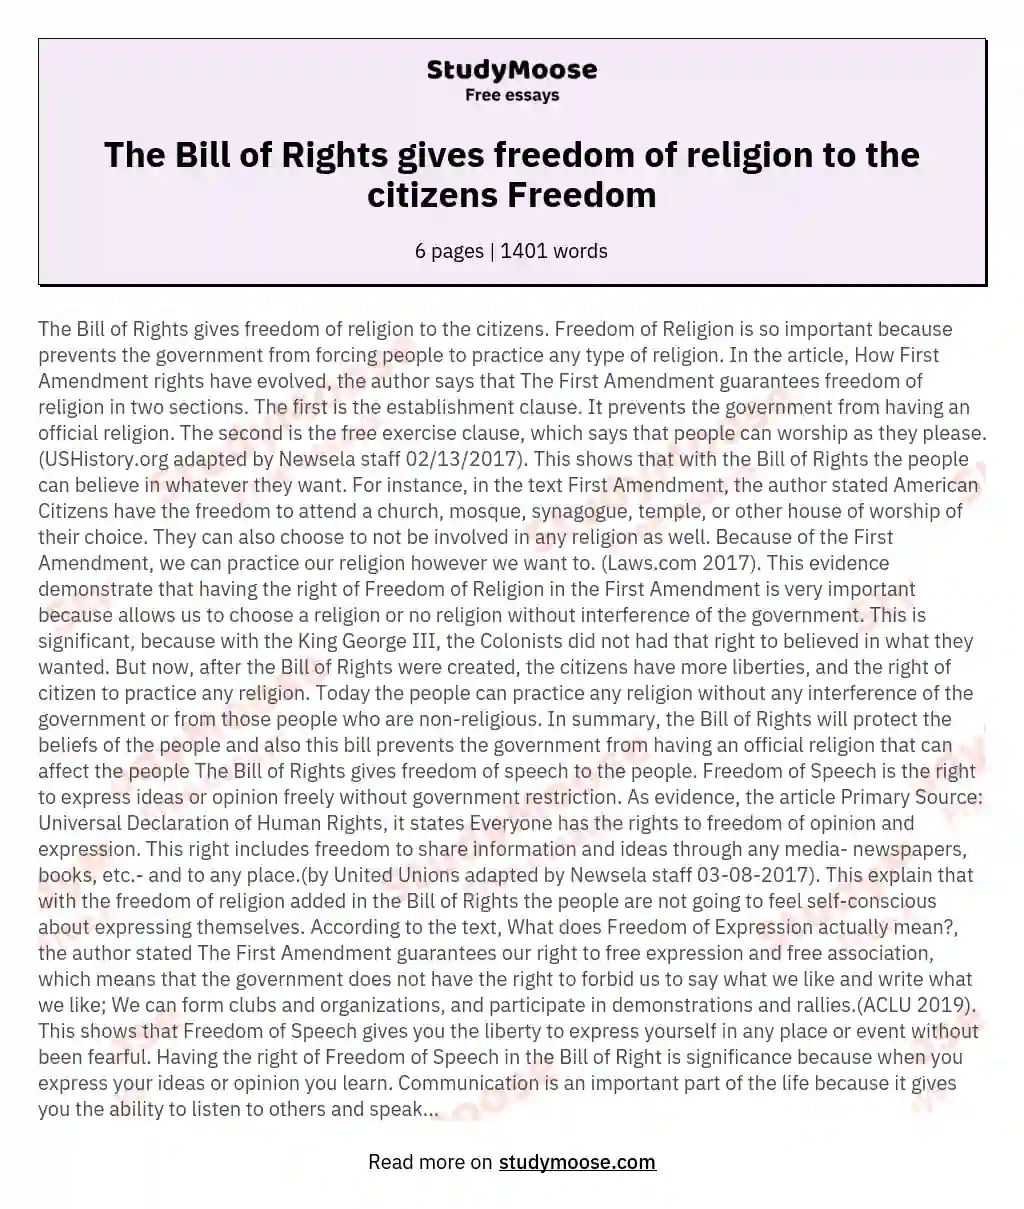 The Bill of Rights gives freedom of religion to the citizens Freedom